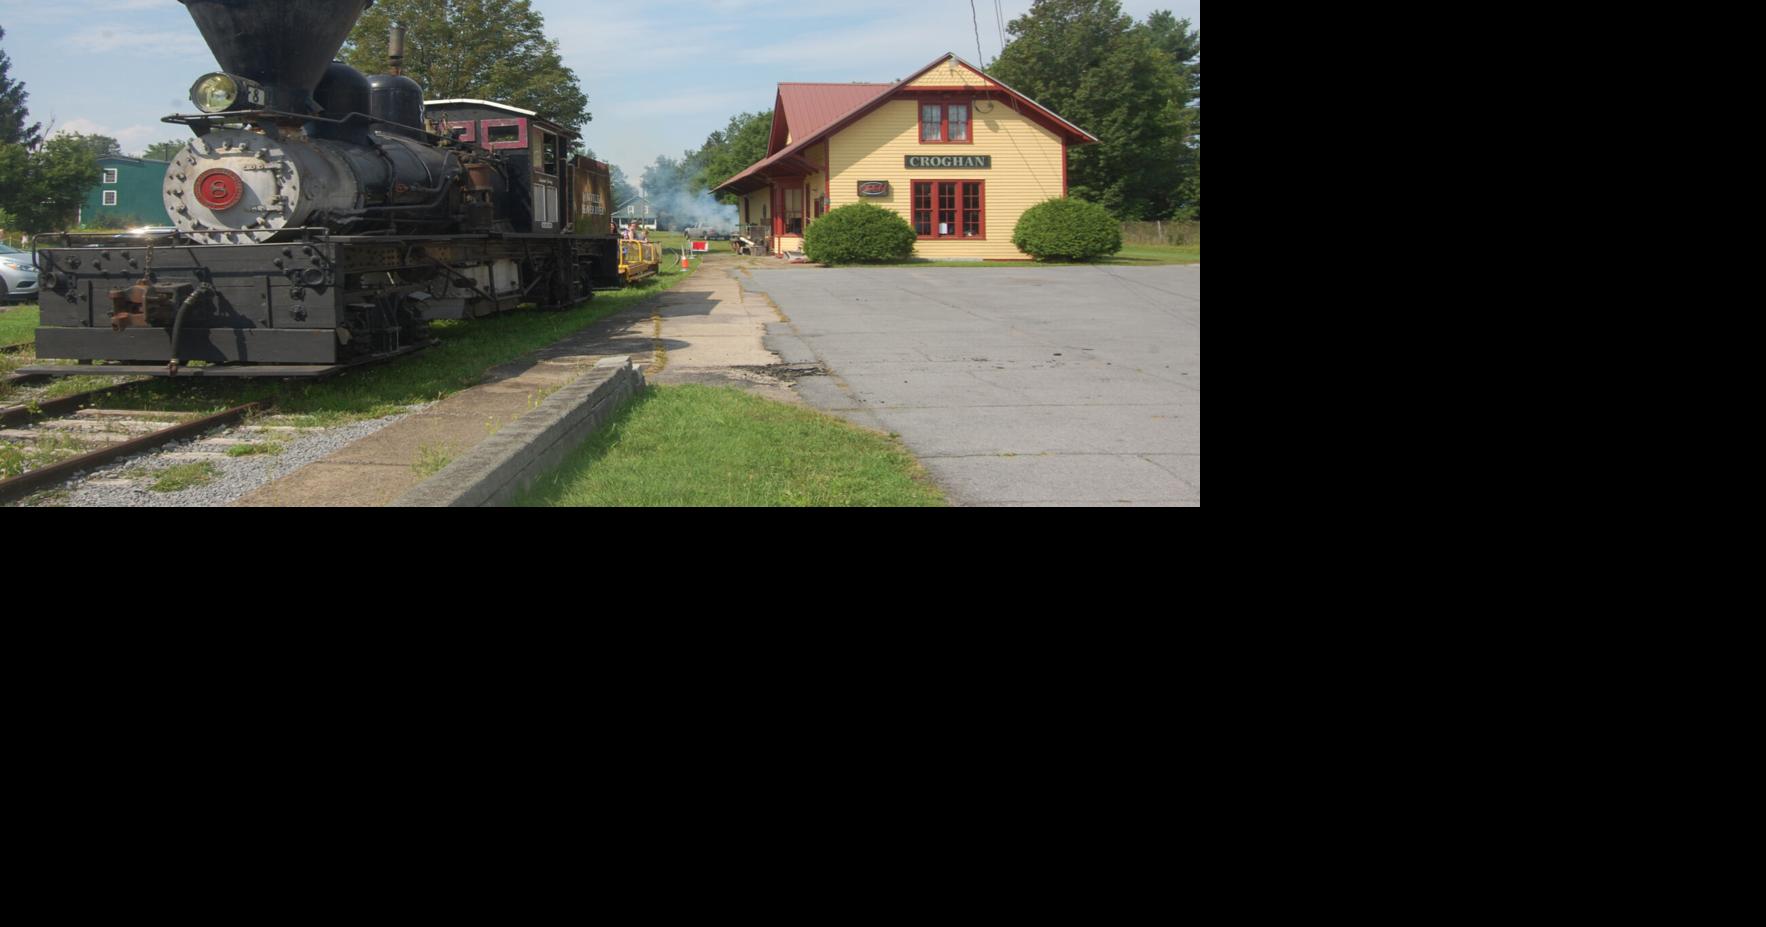 Railroad museum open house this weekend